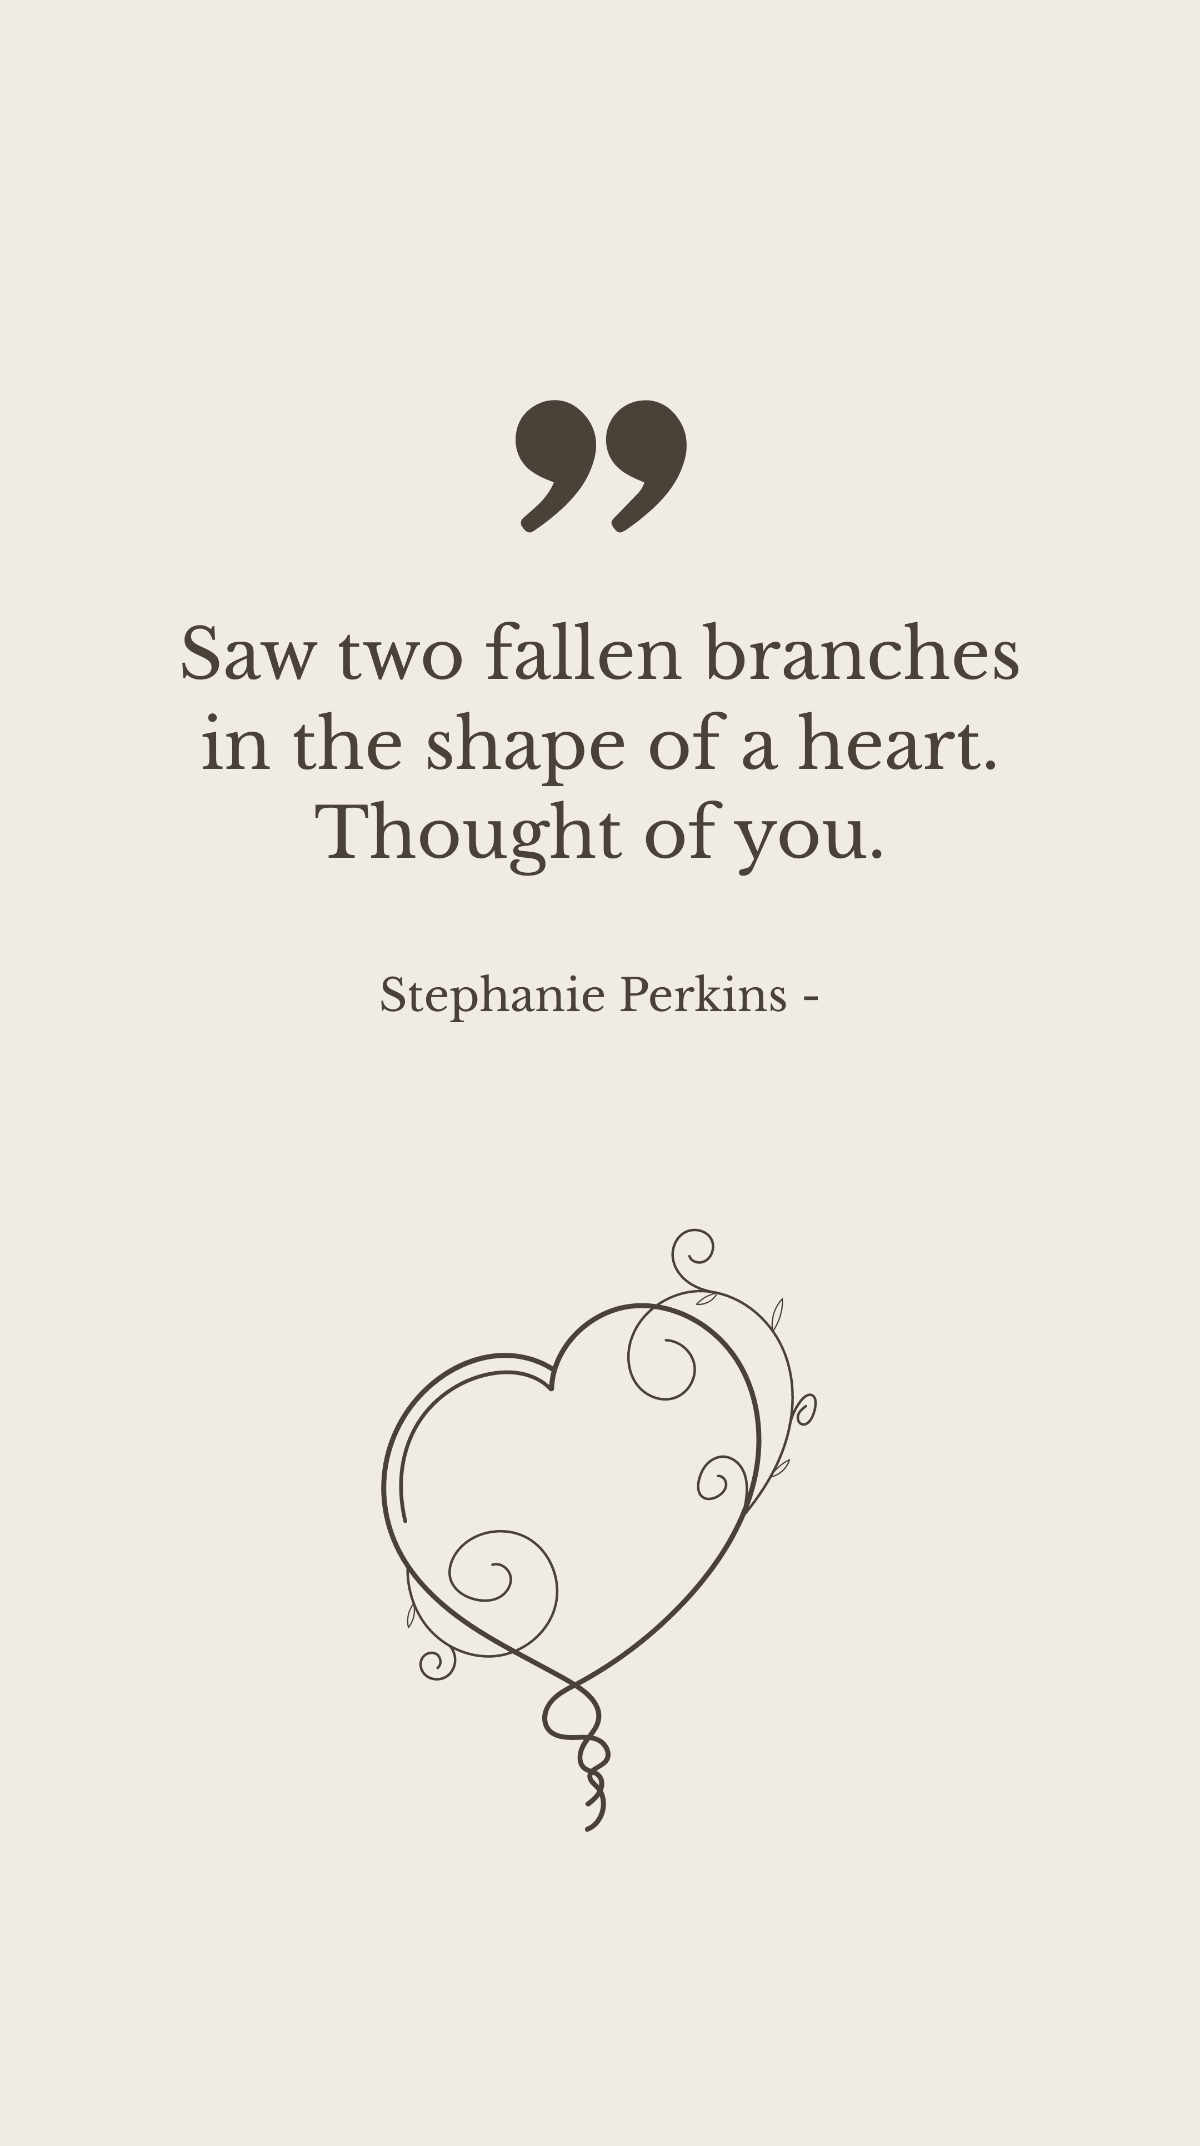 Stephanie Perkins - Saw two fallen branches in the shape of a heart. Thought of you. Template